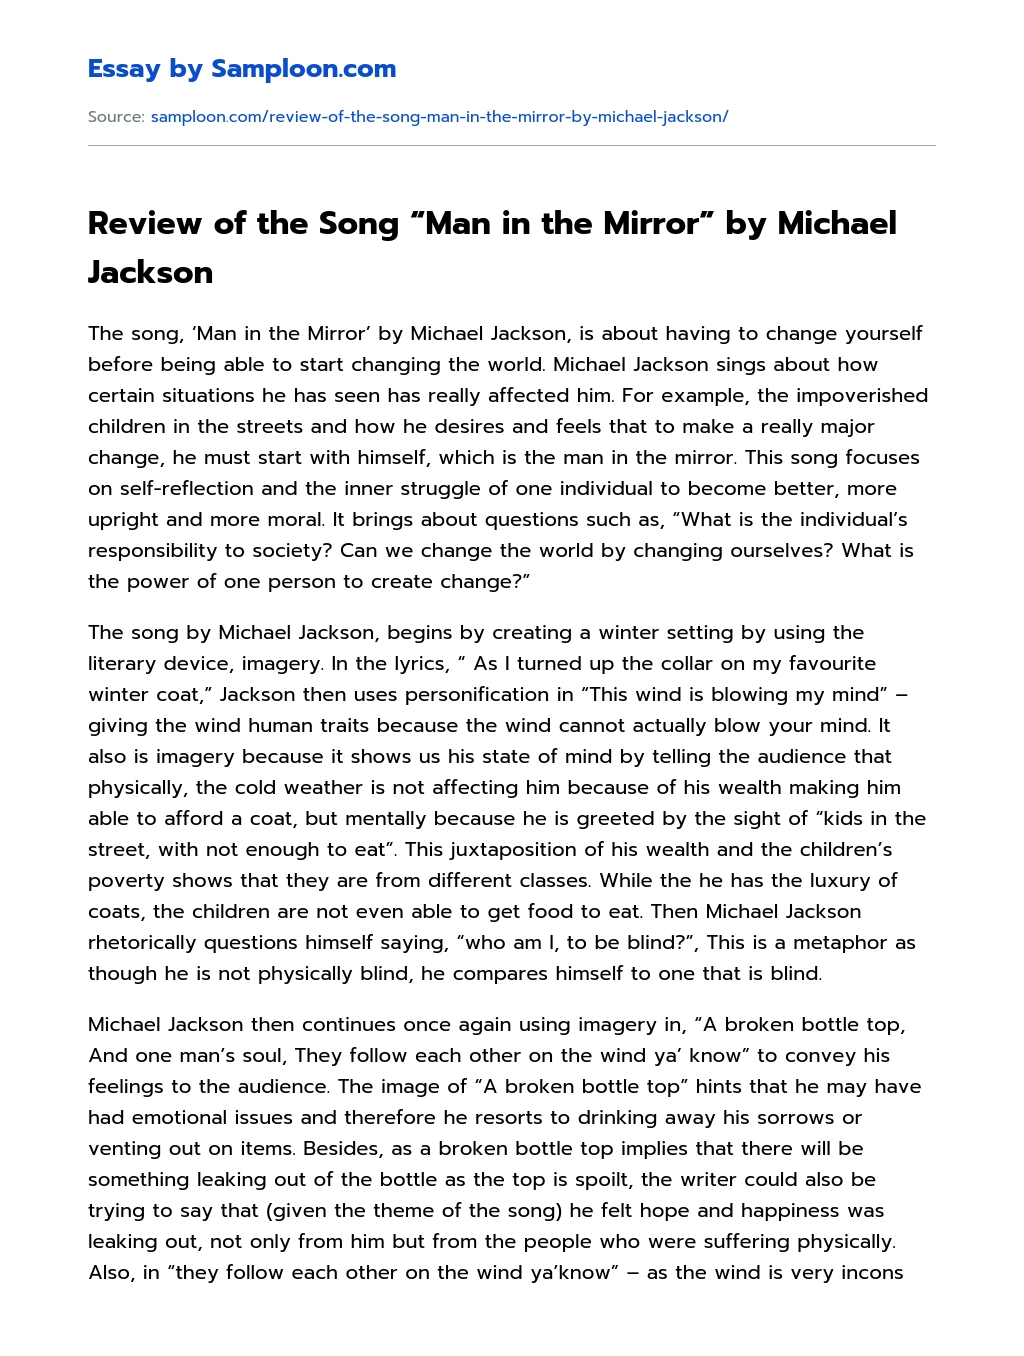 Review of the Song “Man in the Mirror” by Michael Jackson essay